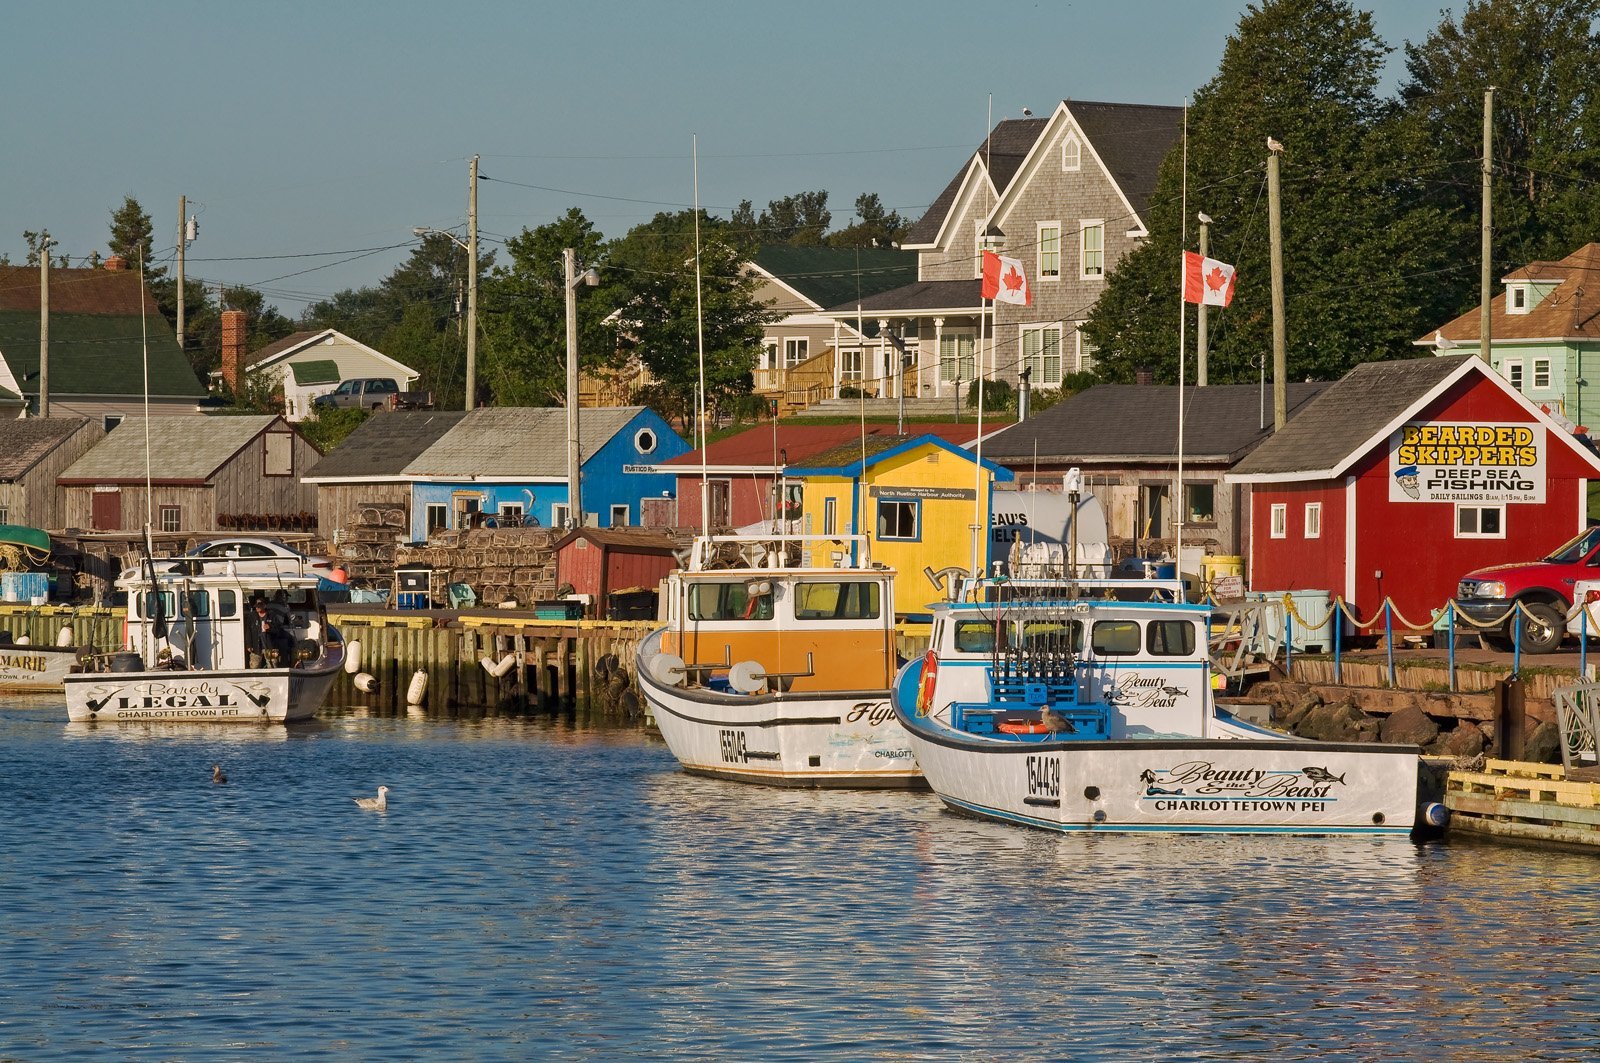 view of fishing shacks including "Bearded Skippers Deep Sea Fishing" at North Rustico Harbour